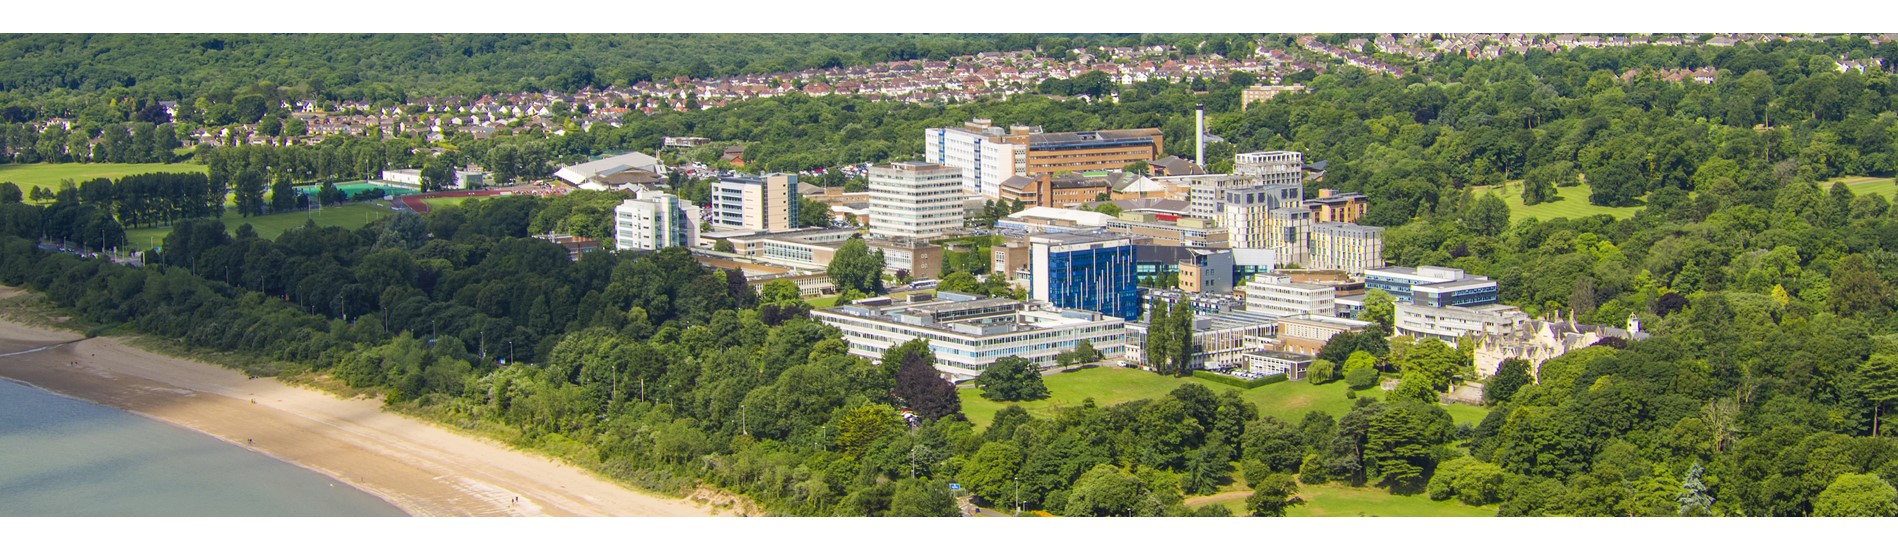 Areal View of Singleton Campus